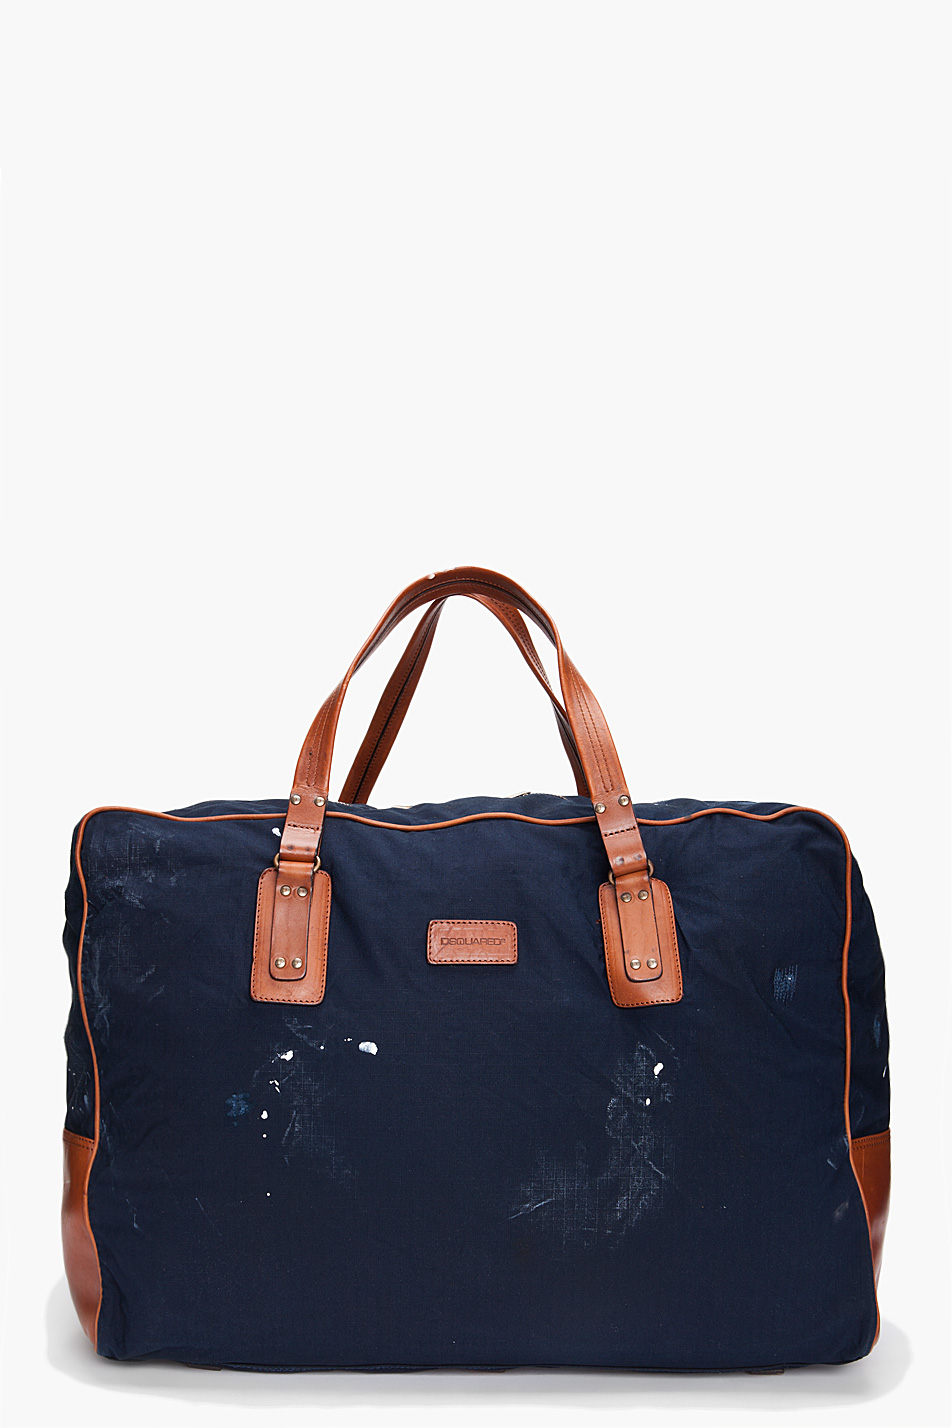 Dsquared² Canvas Duffle Bag in Blue for Men | Lyst